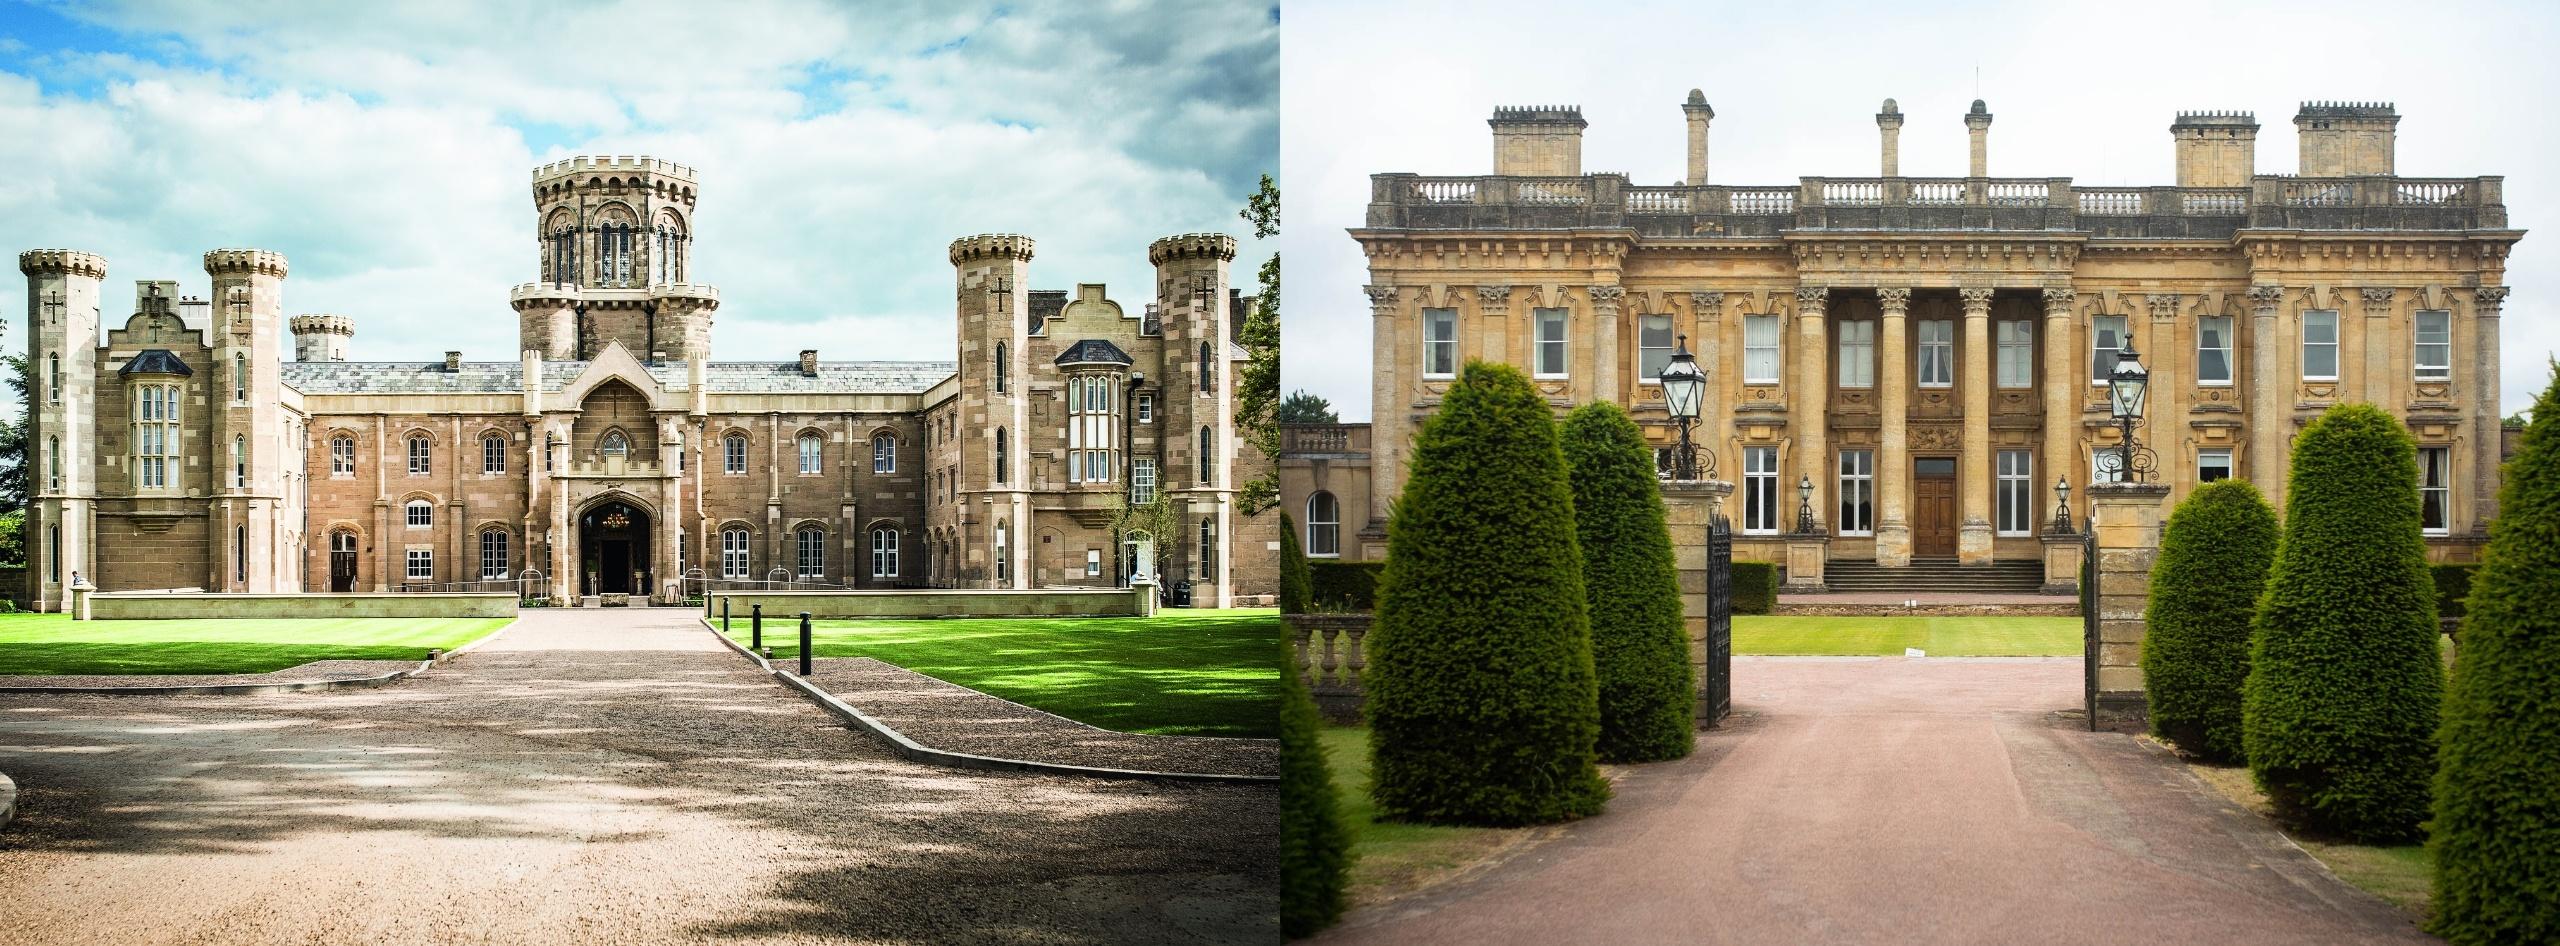 Spa & Hotel Of The Month April 2023: Studley Castle & Heythrop Park from Warner Hotels